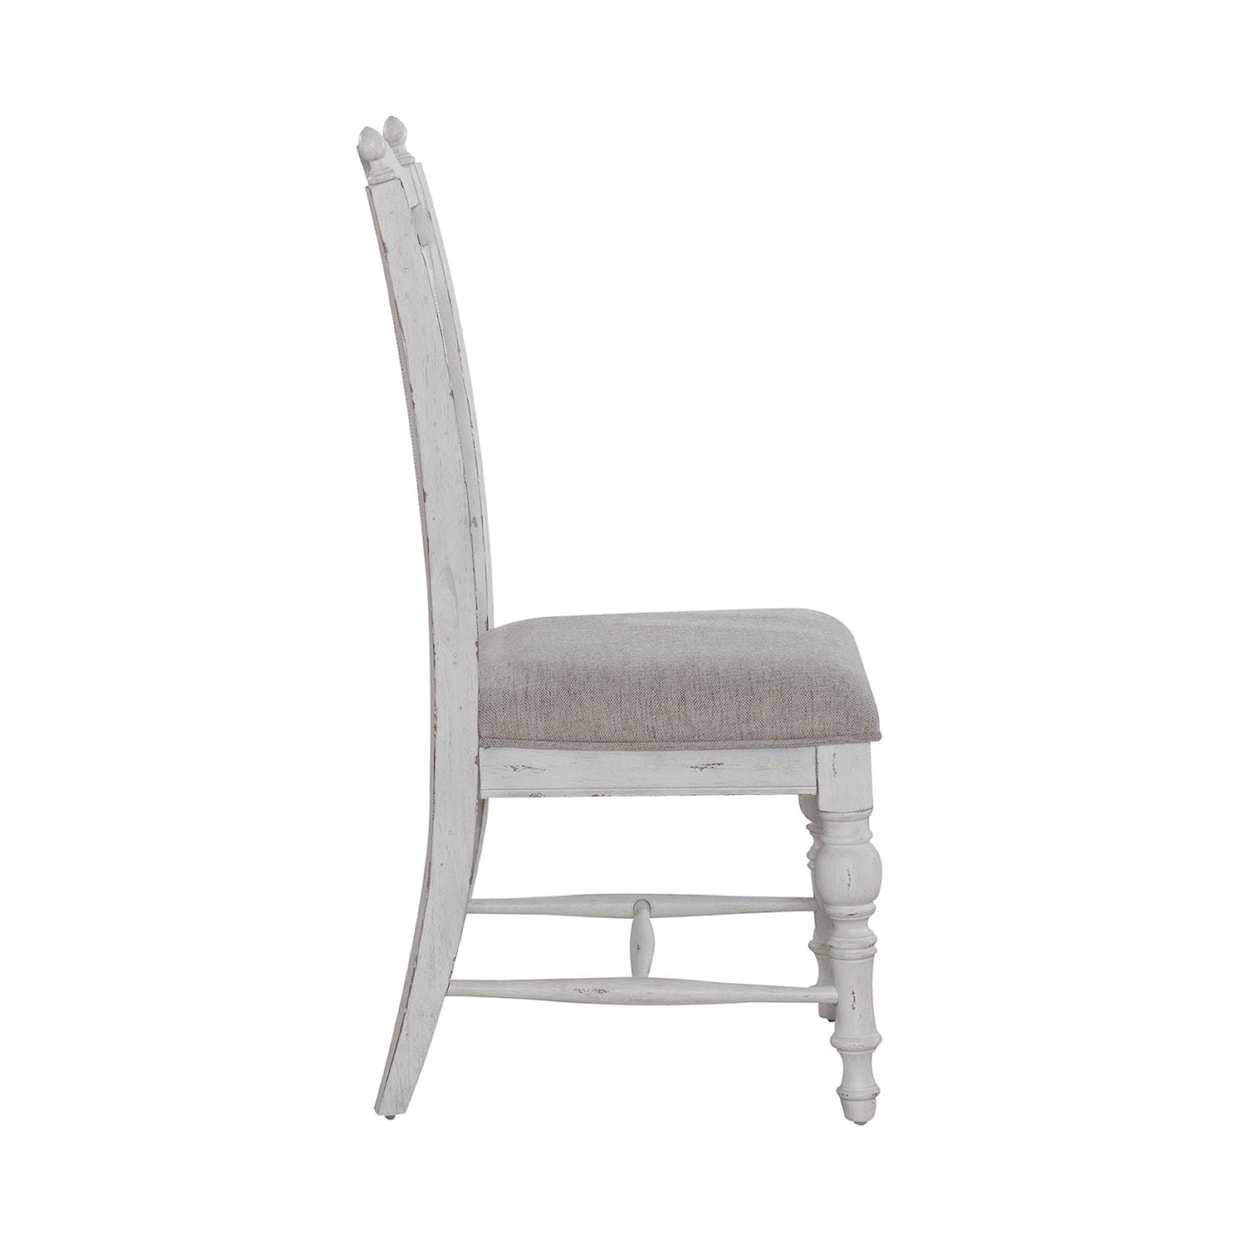 Liberty Furniture River Place Panel Back Side Chair